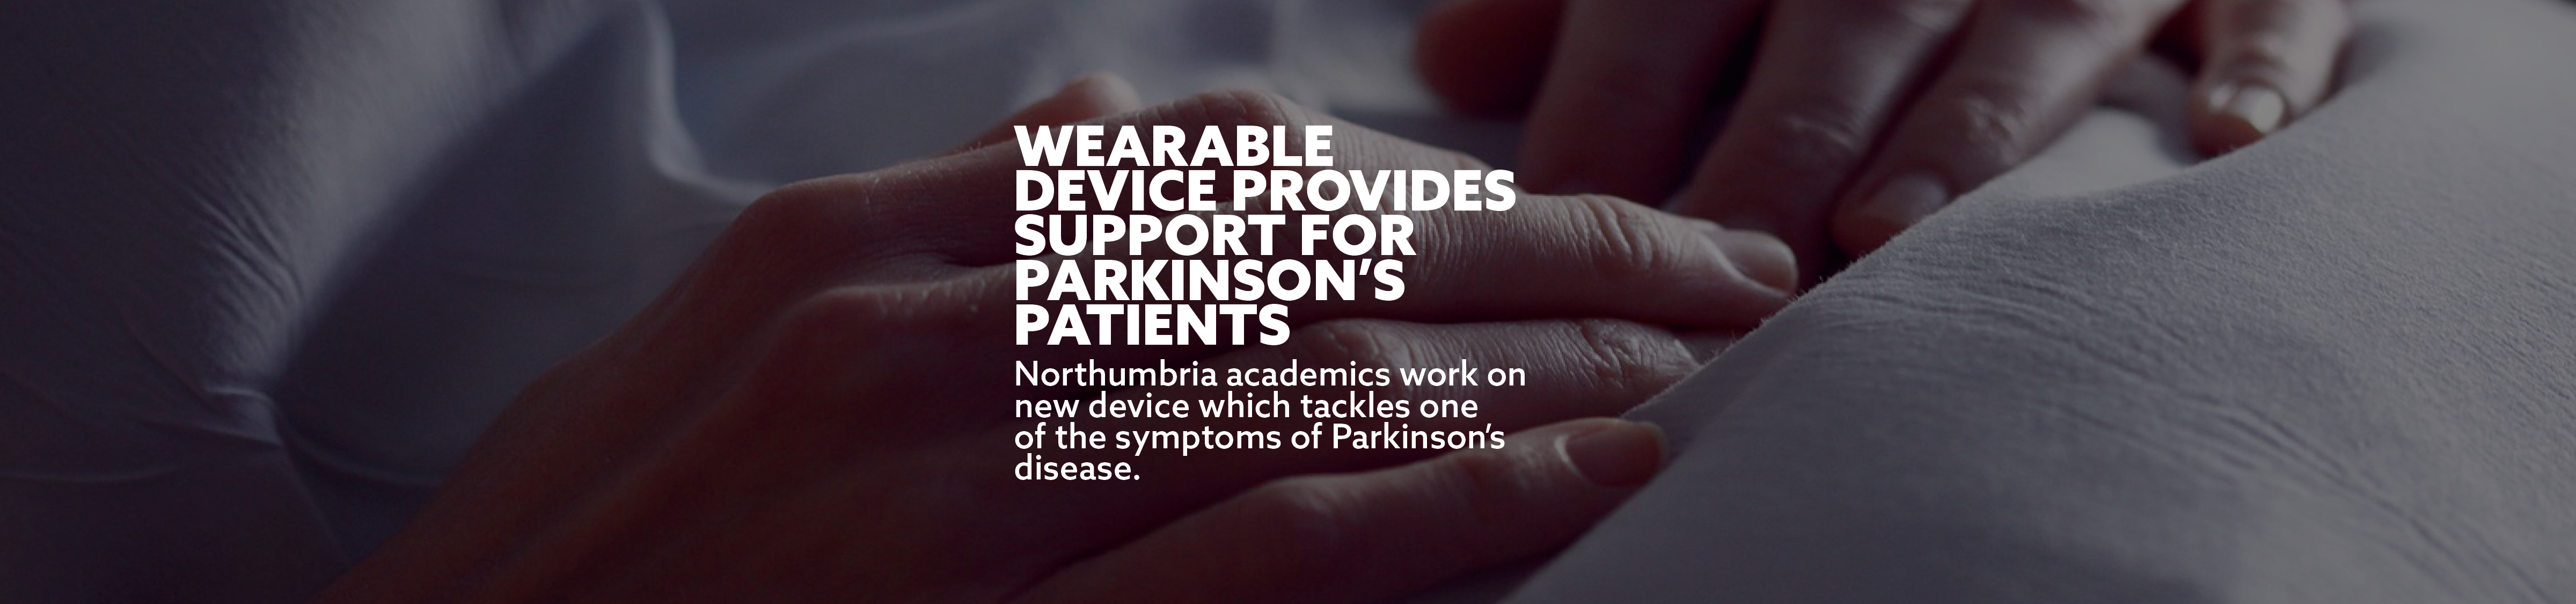 Wearable device provides support for Parkinson's patients